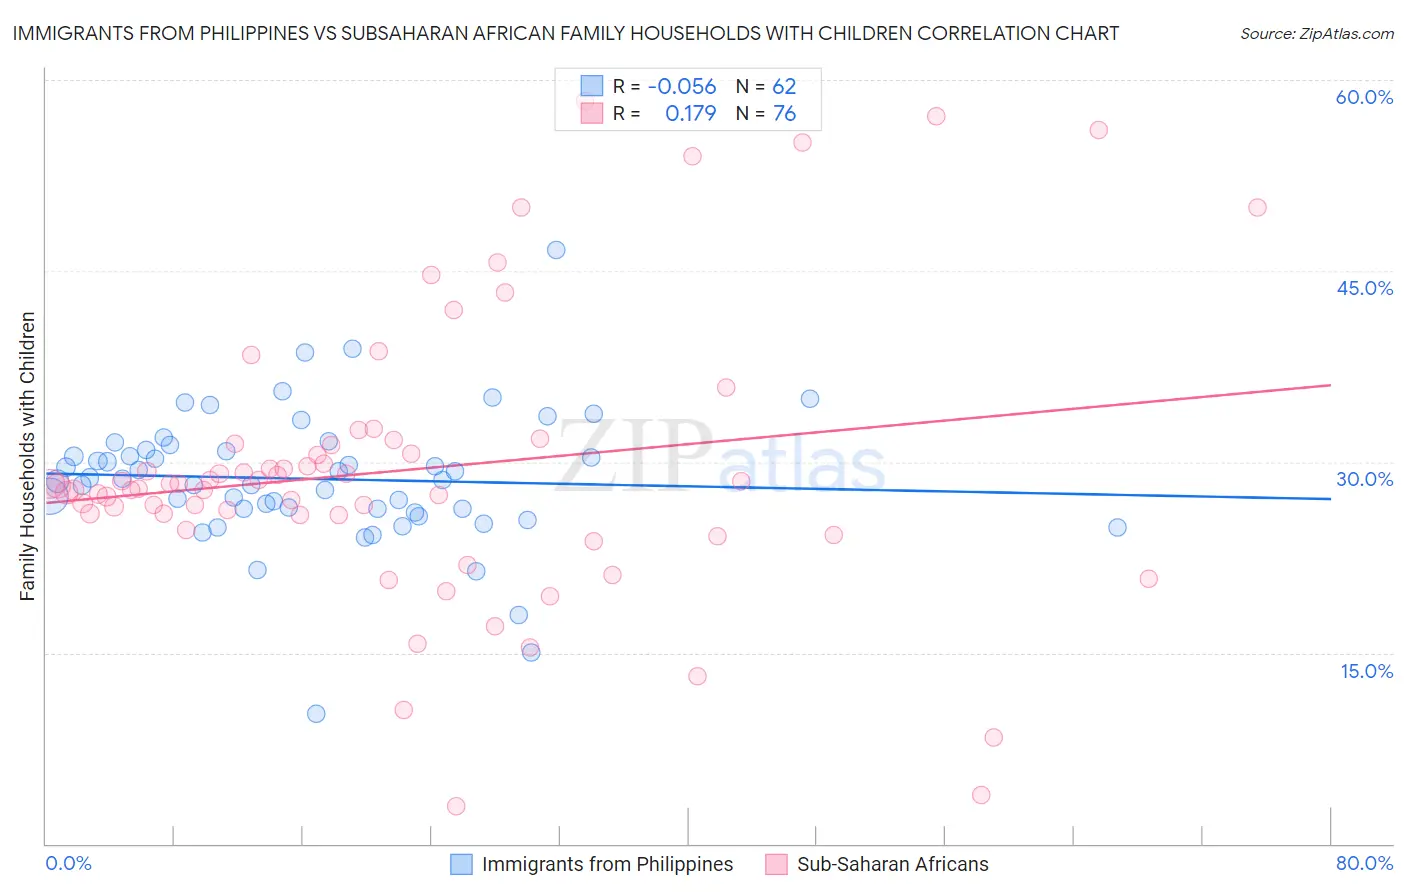 Immigrants from Philippines vs Subsaharan African Family Households with Children